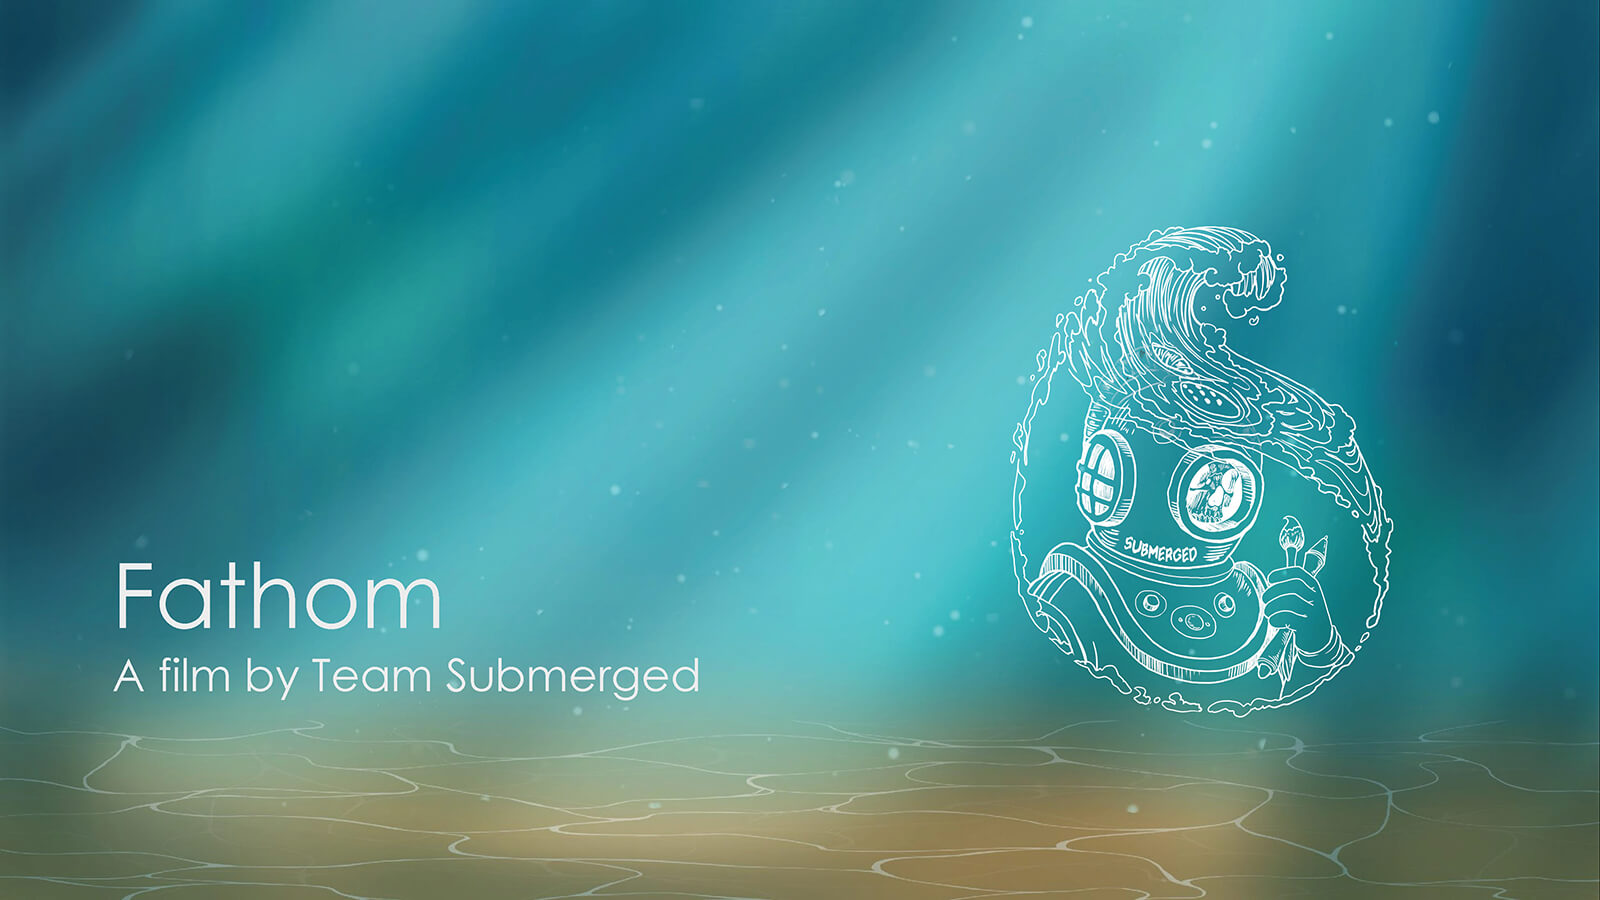 Title page for the film Fathom by Team Submerged